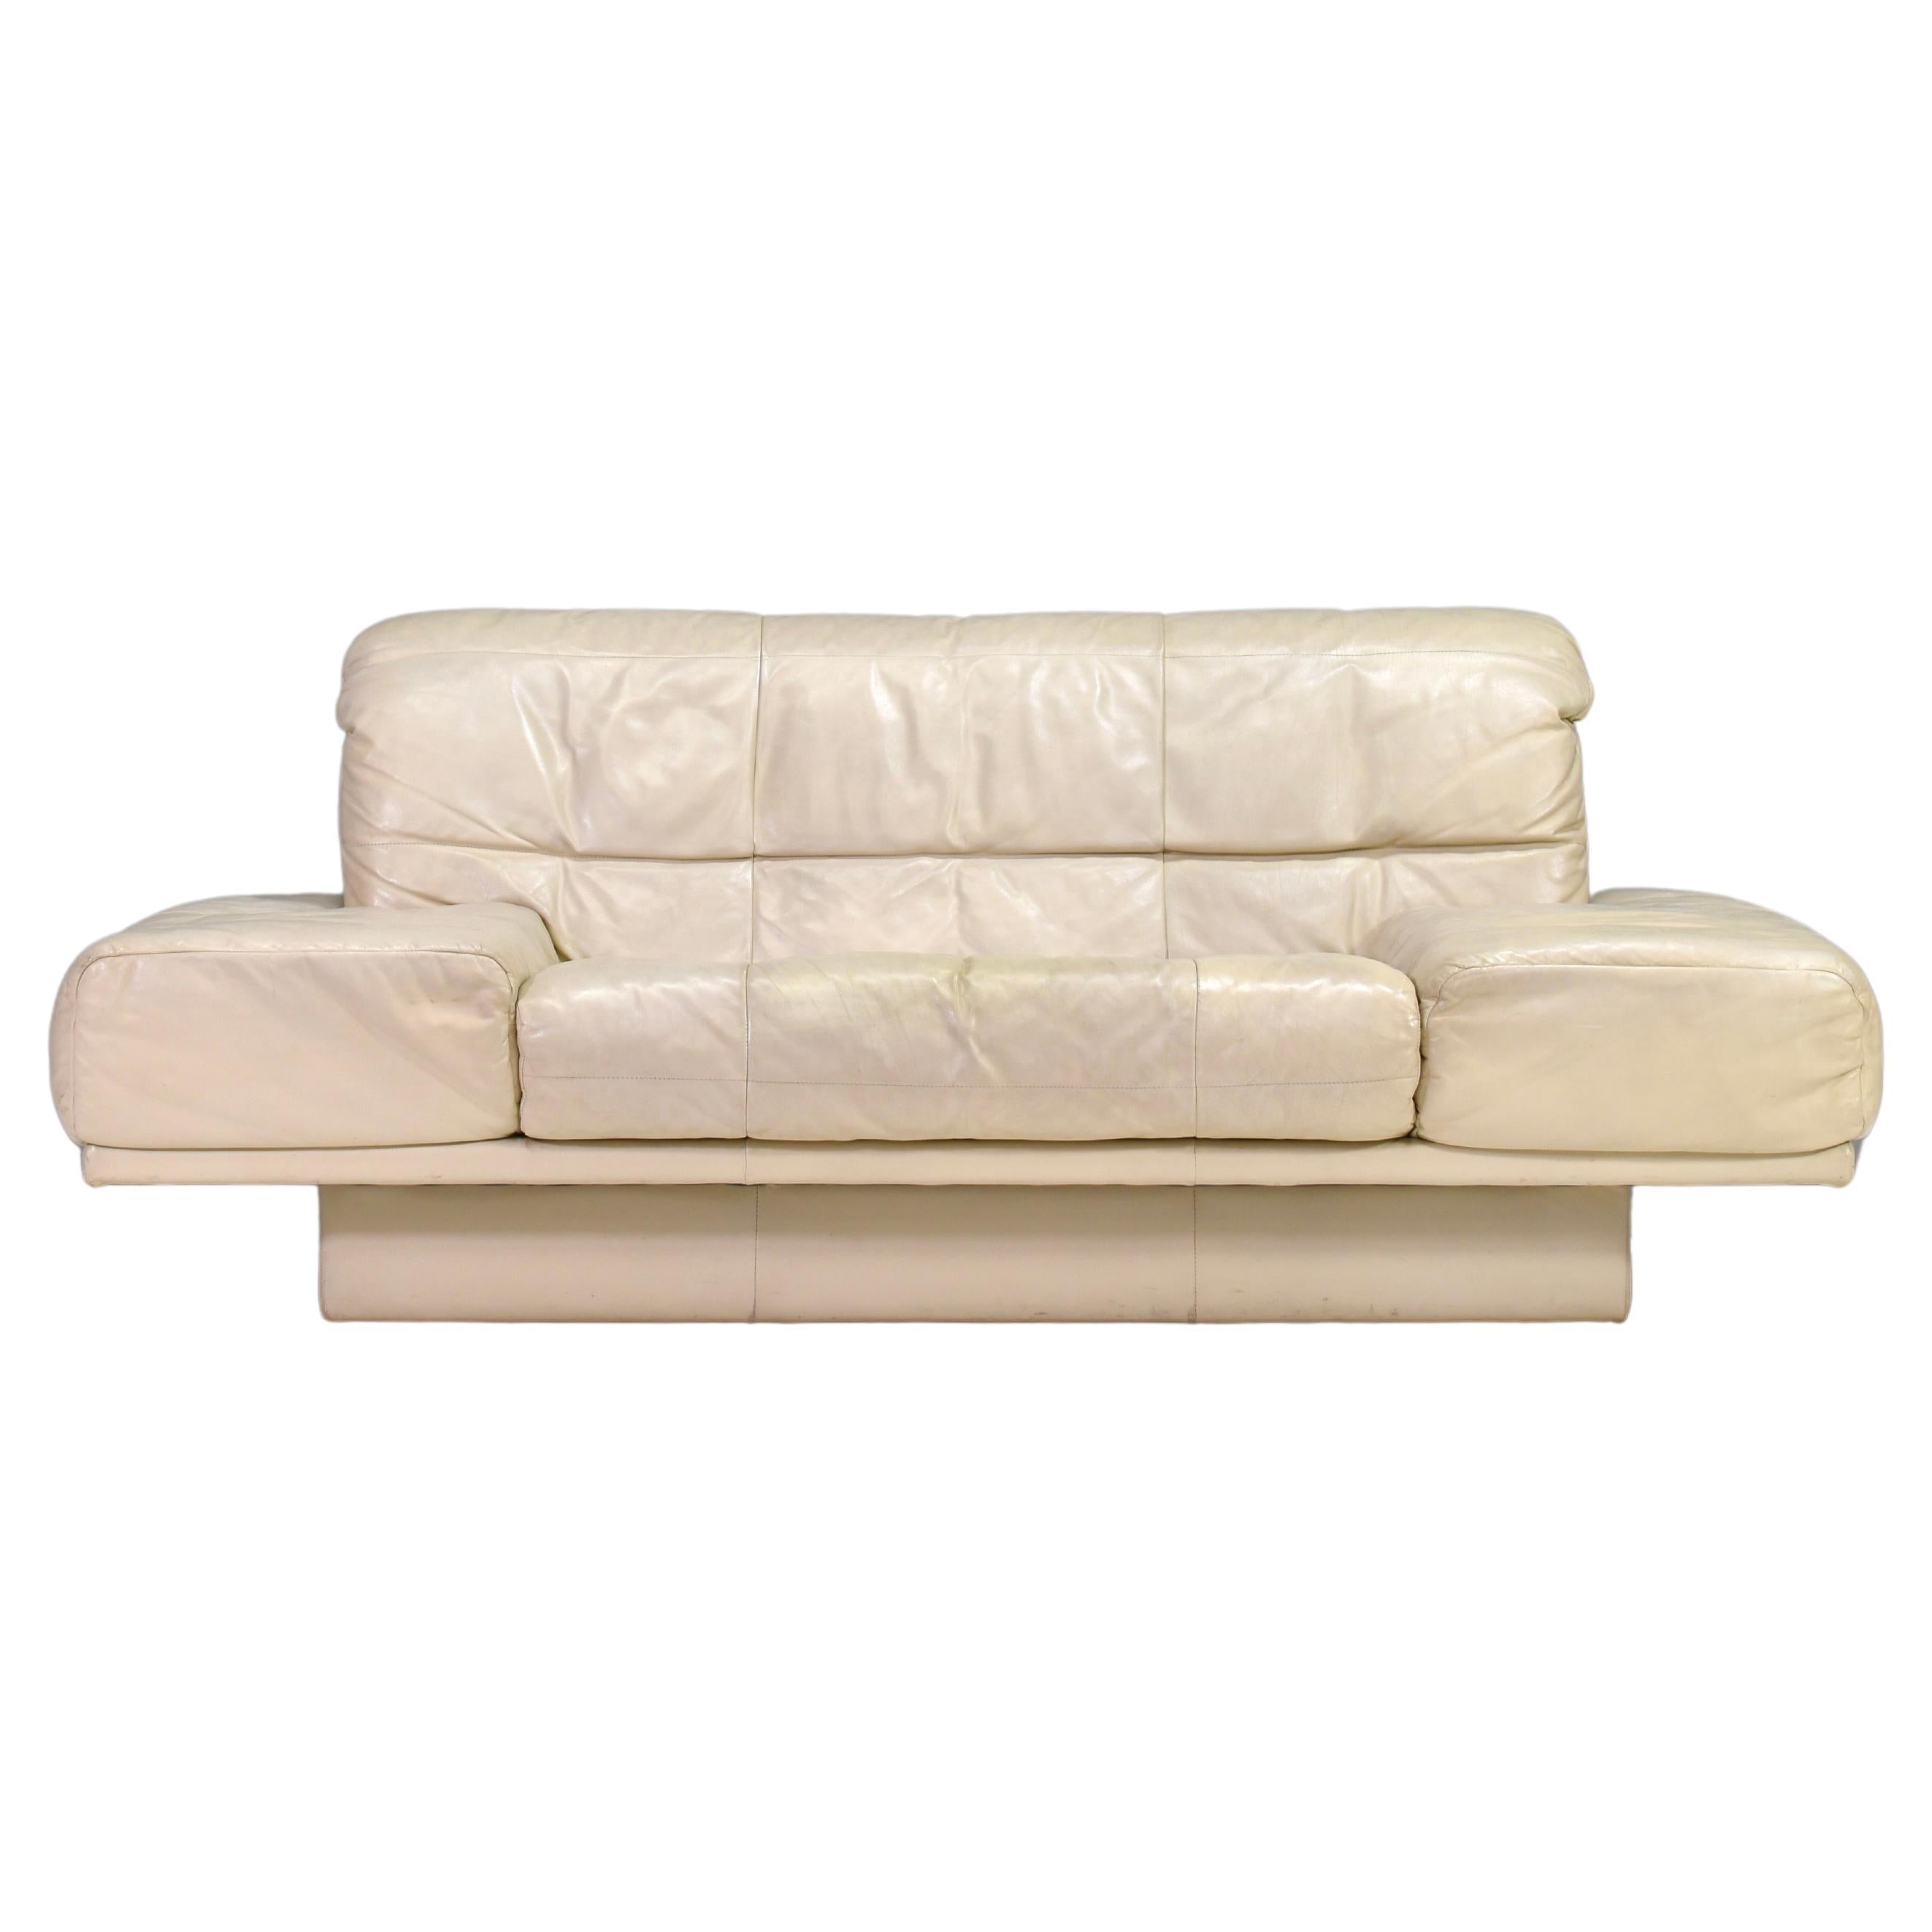 Rolf Benz 2-seat sofa in Ivory Cream White Leather – Germany, circa 1980-1990